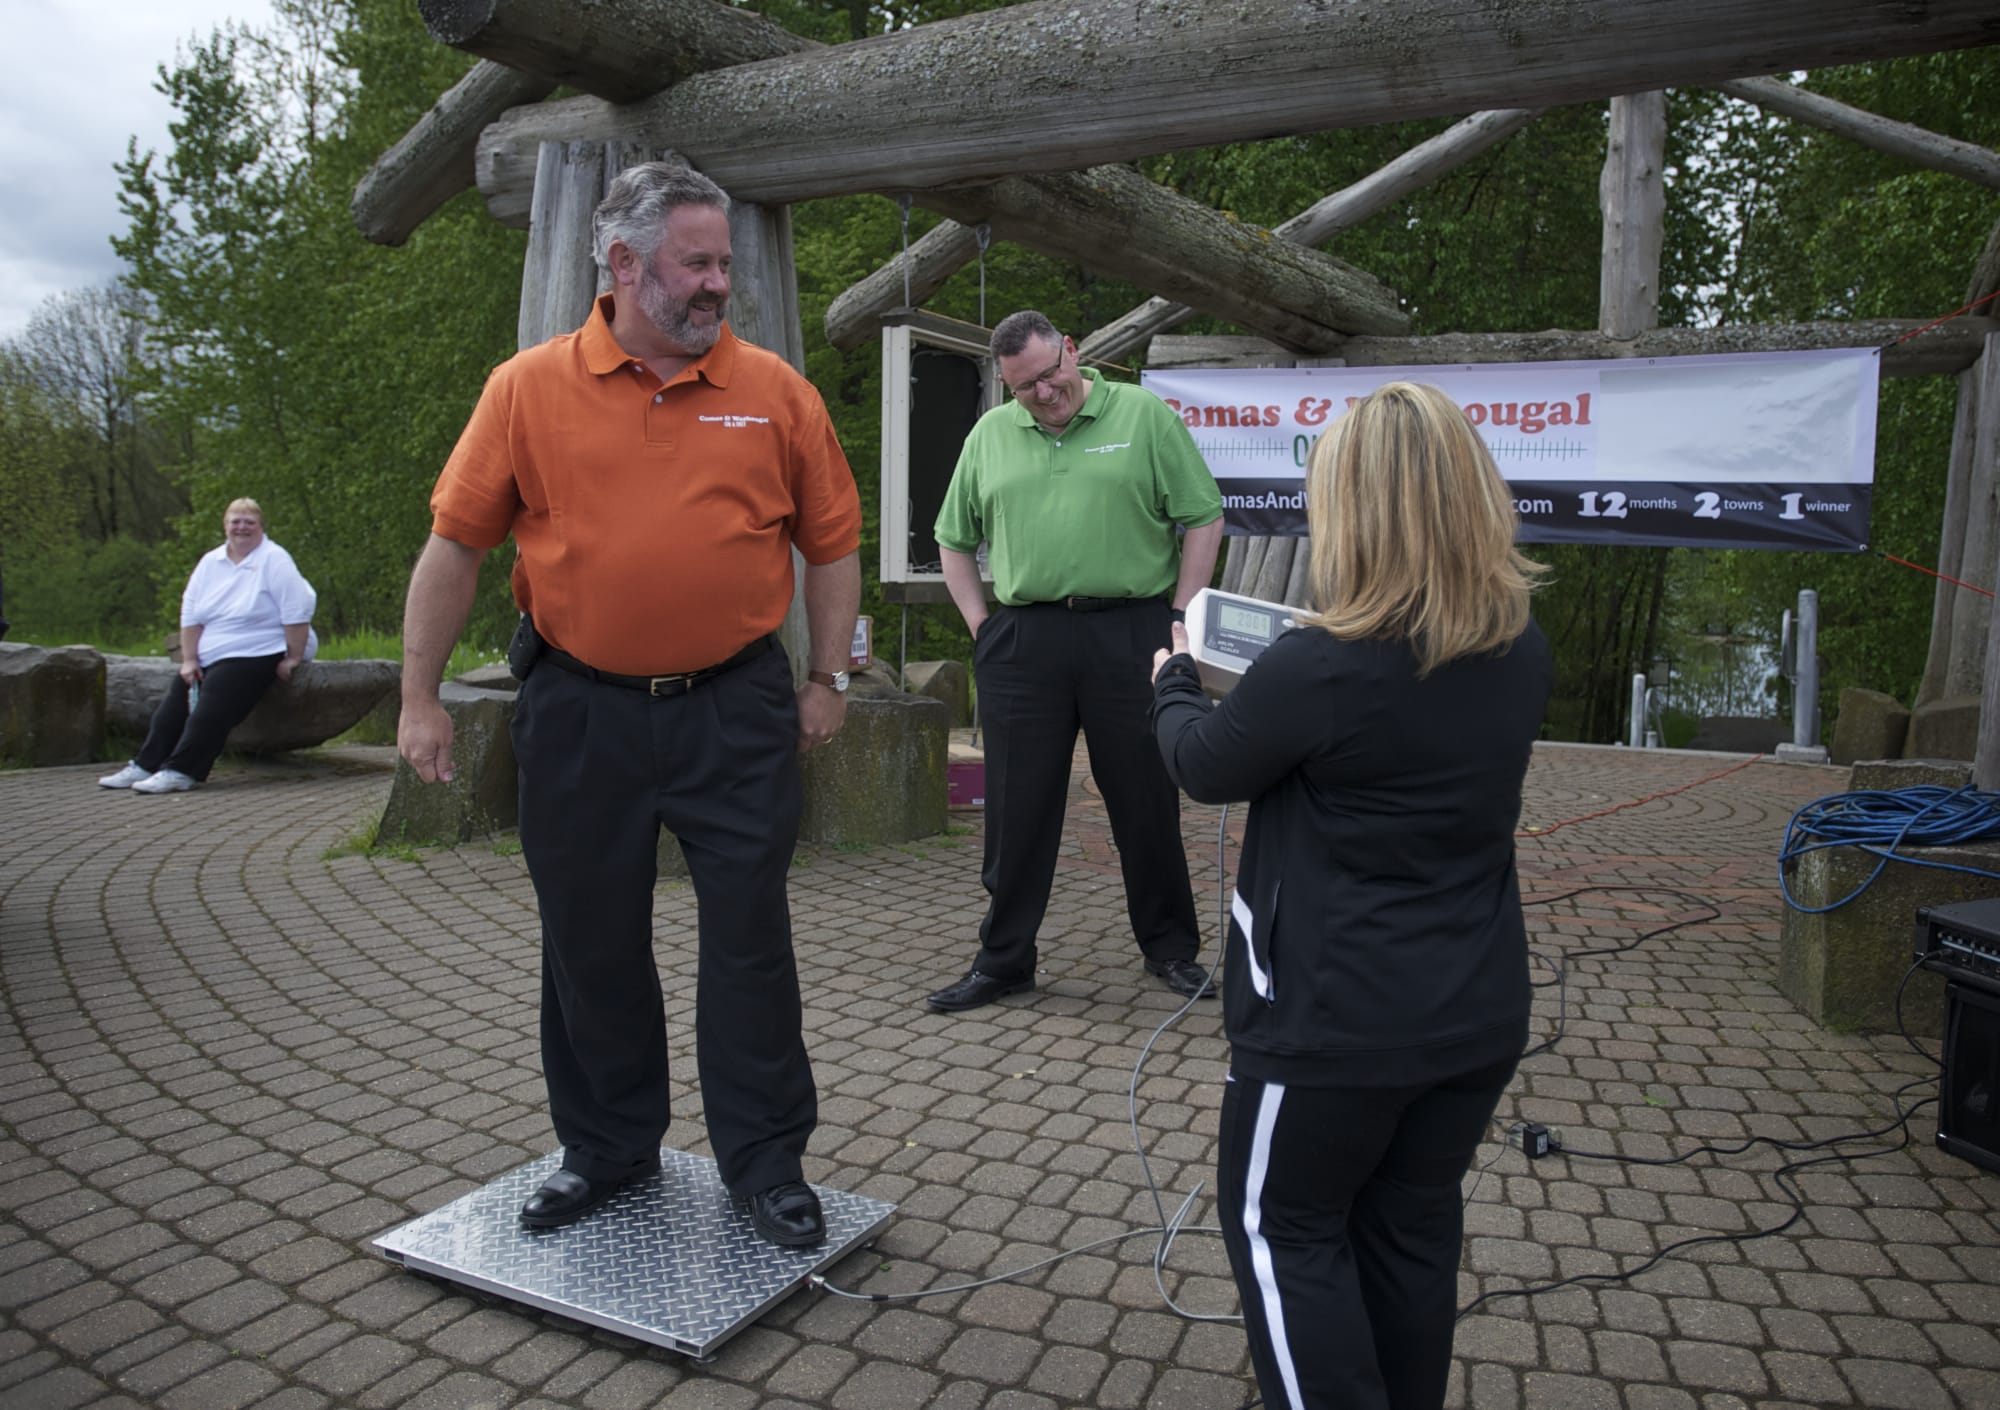 Washougal Mayor Sean Guard, in orange shirt, steps on the scale as Camas Mayor Scott Higgins, in green shirt, watches during the launch of the community weight-loss challenge, &quot;Camas and Washougal On A Diet,&quot; on Wednesday at Capt. William Clark Park in Washougal.